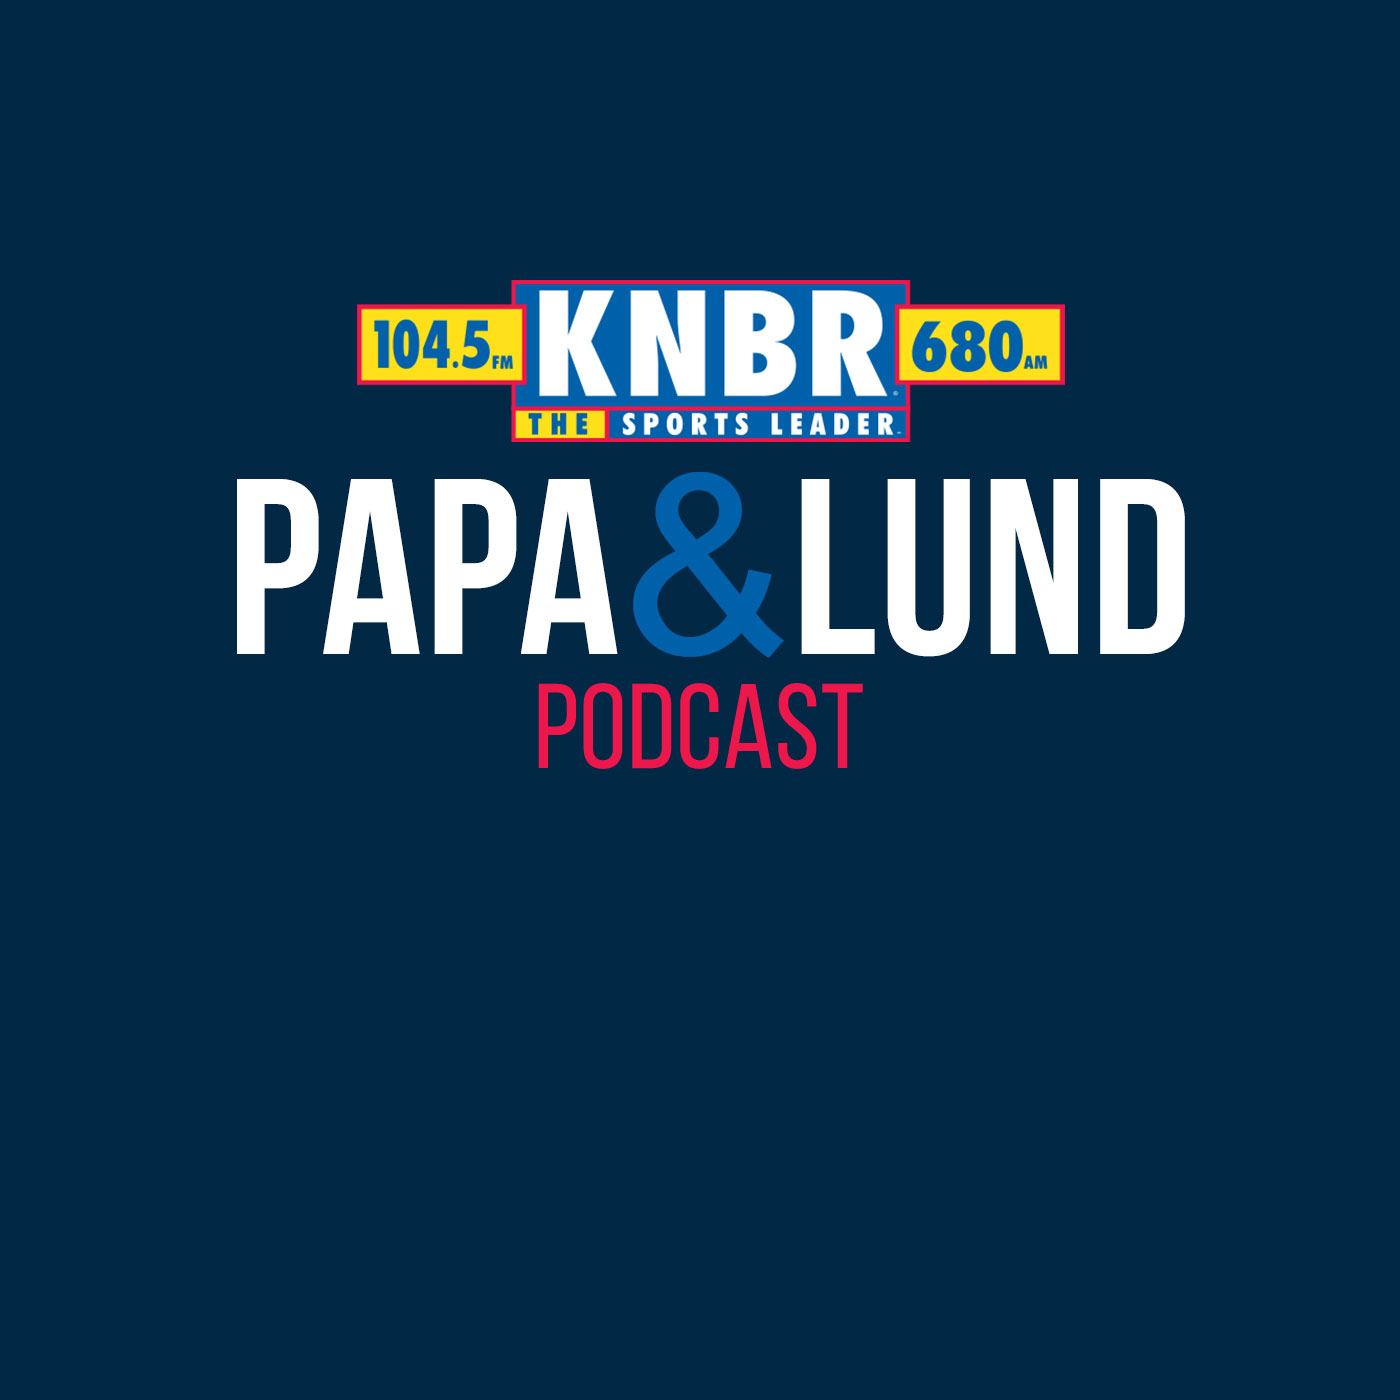 3-8 Kevin Frandsen joins Papa & Lund to discuss who he believe to be in the mix for the NL Wild Card entering the season and where the Giants fit into that picture